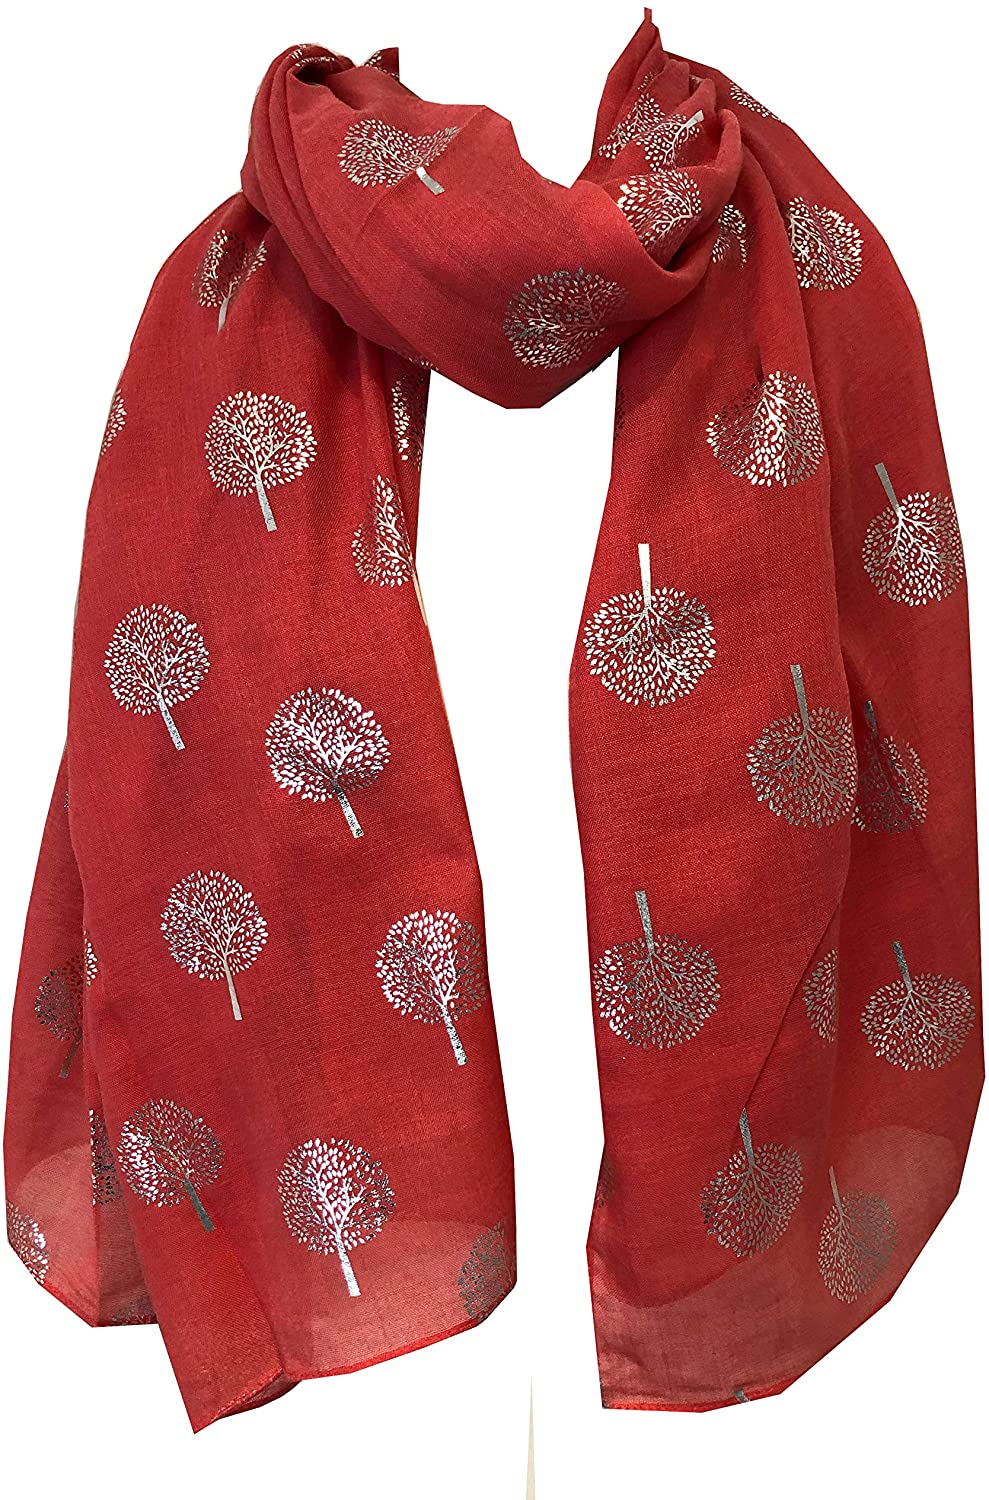 Pamper Yourself Now Coral with Silver Foiled Mulberry Tree Design Ladies Scarf/wrap. Great Present for Mum, Sister, Girlfriend or Wife.